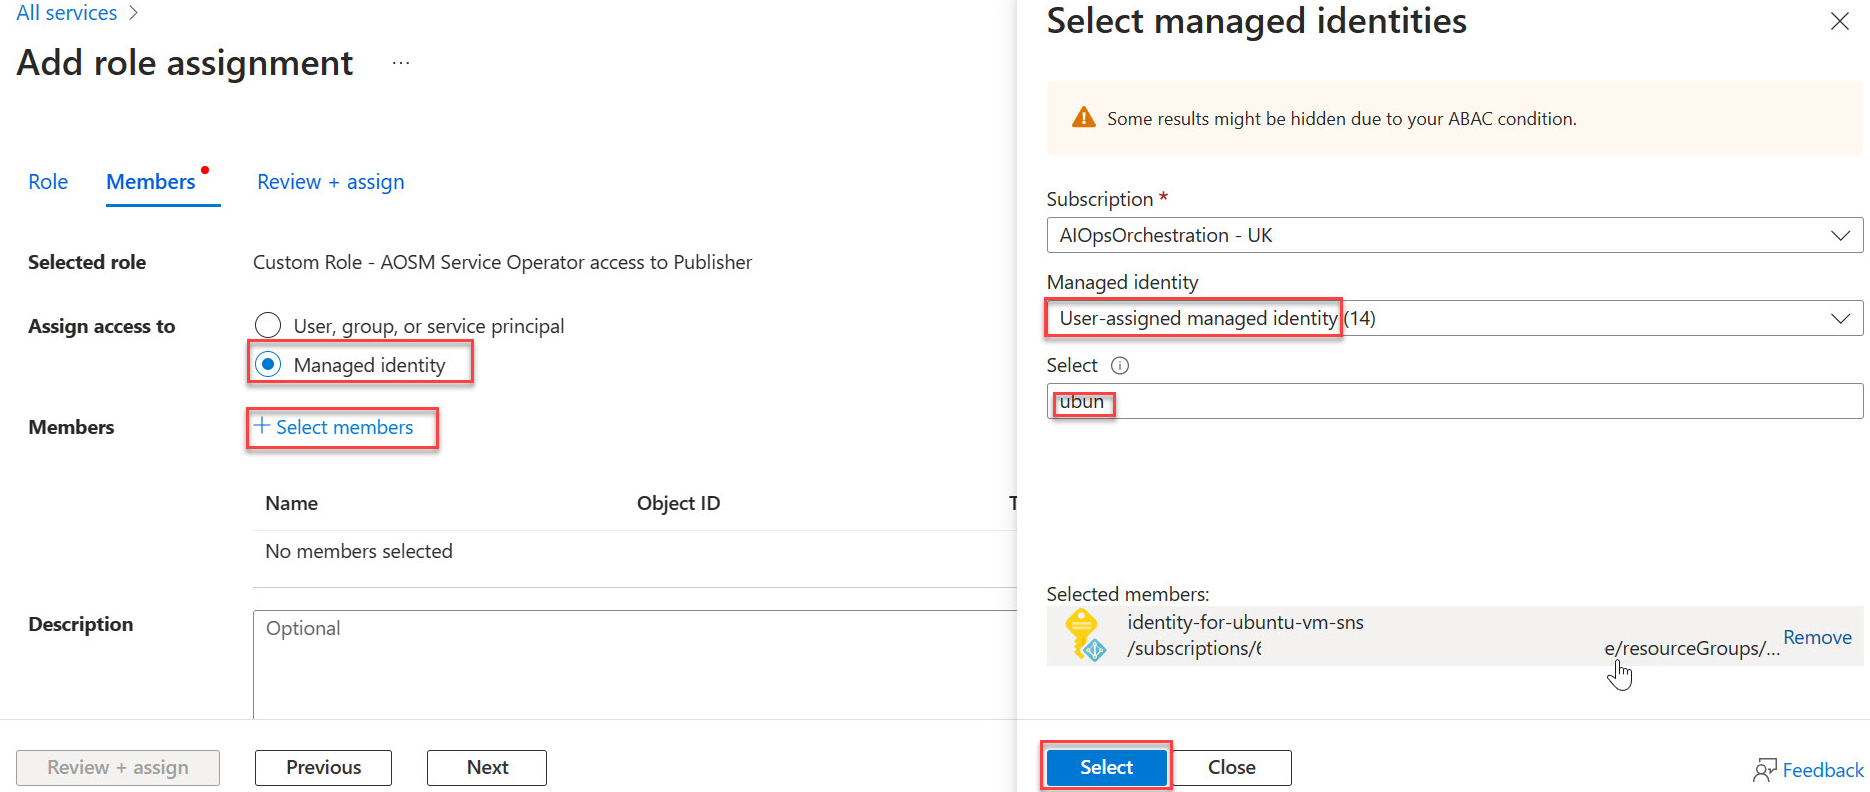 Screenshot showing the add role assignment and select managed identities.